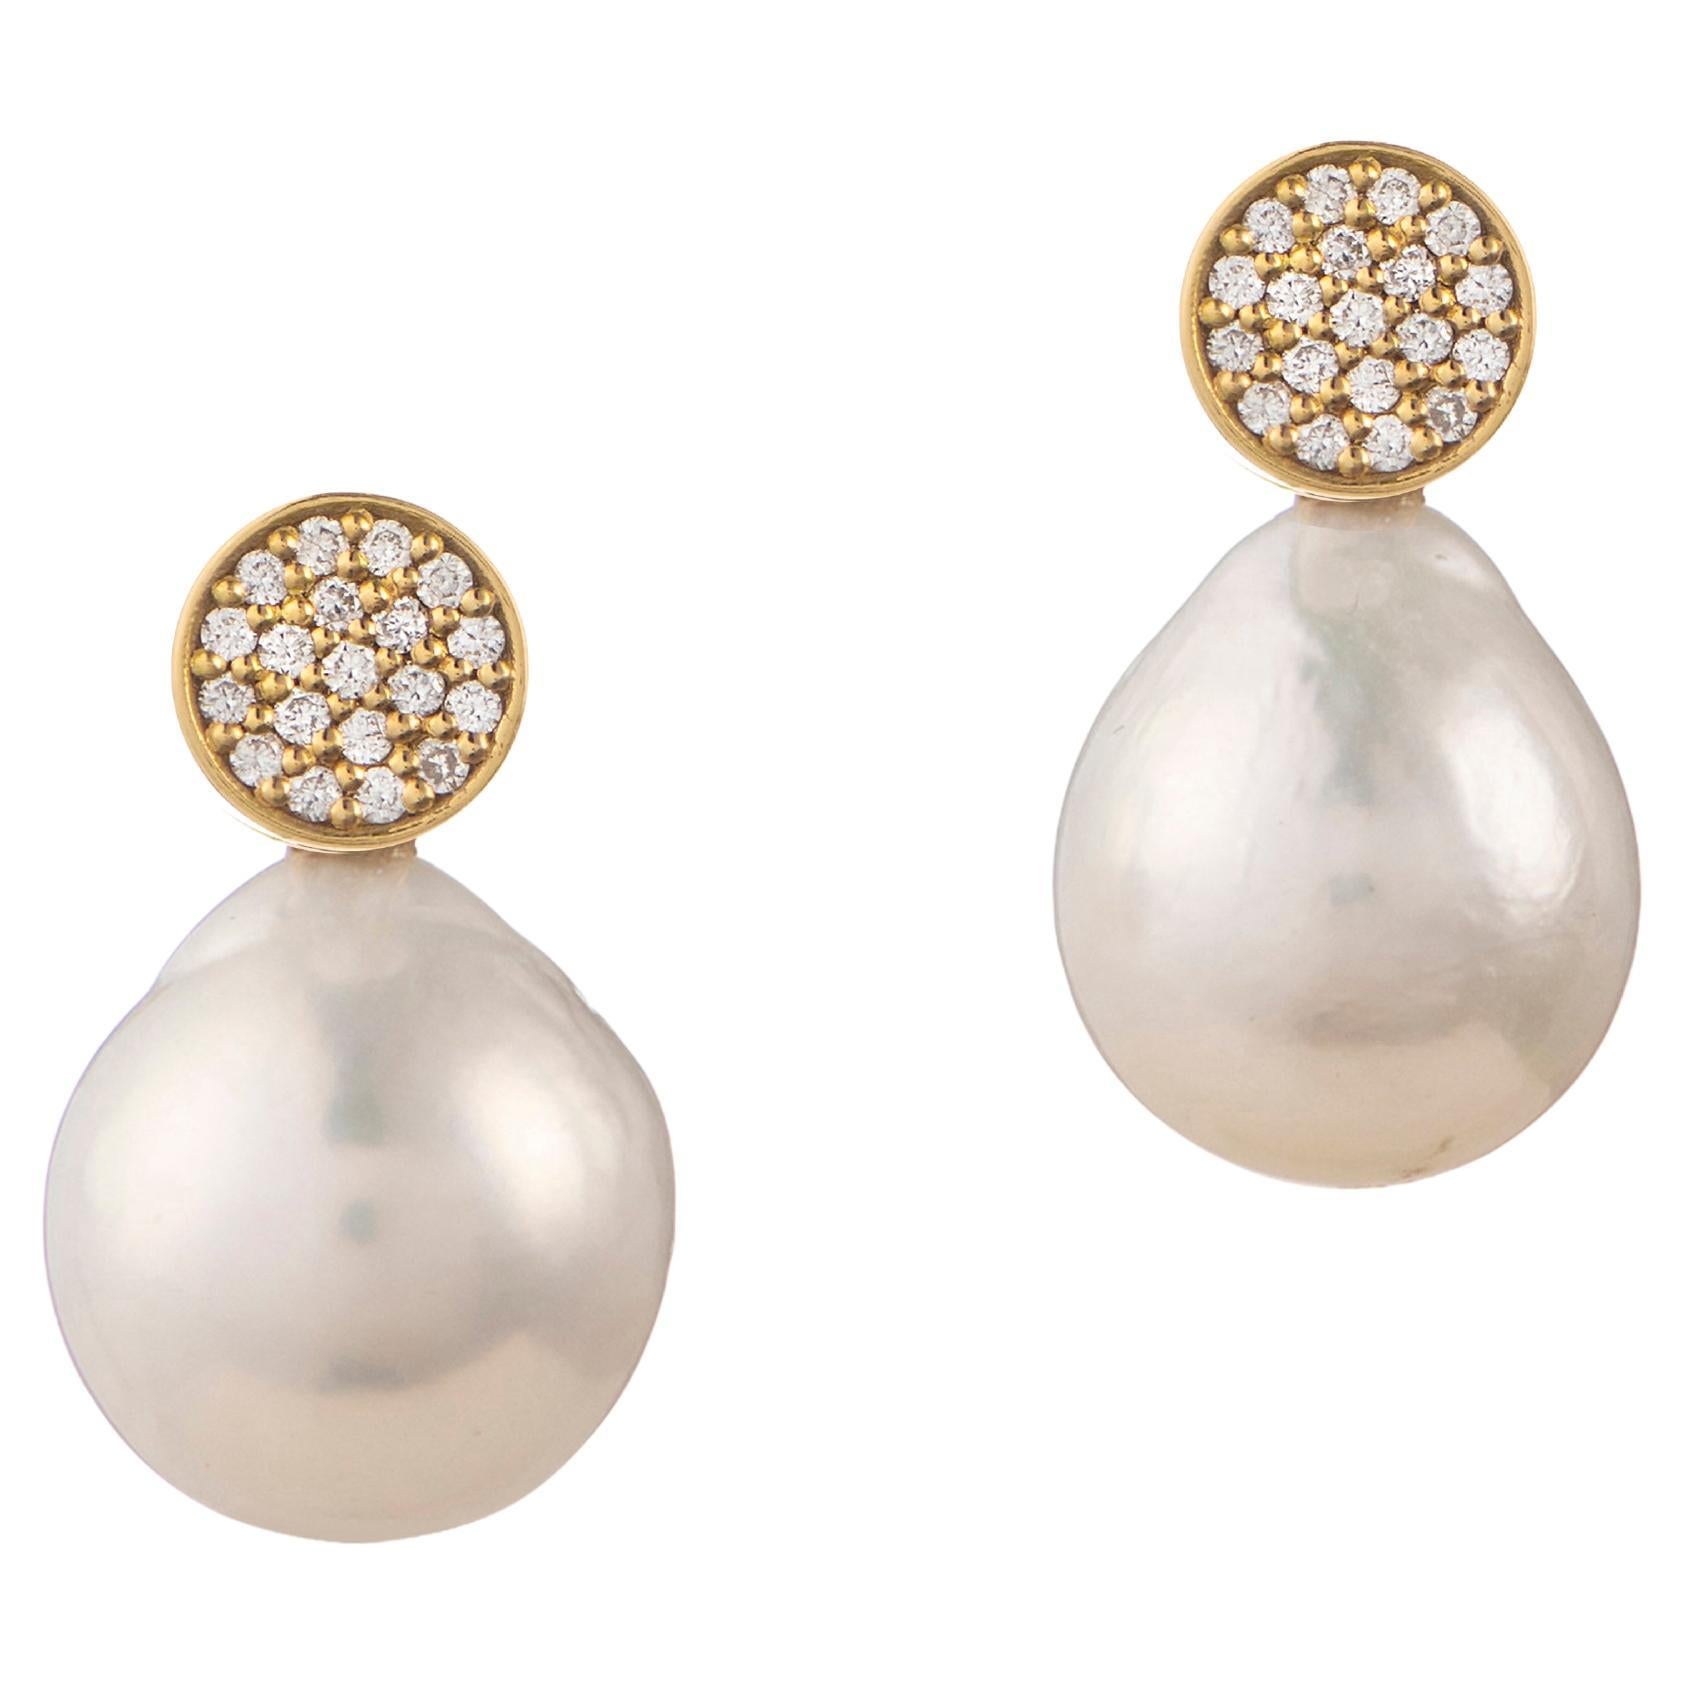 Diamond MICROPAVE earrings 0.20CTS with Detachable Baroque Pearls, 18K Gold For Sale